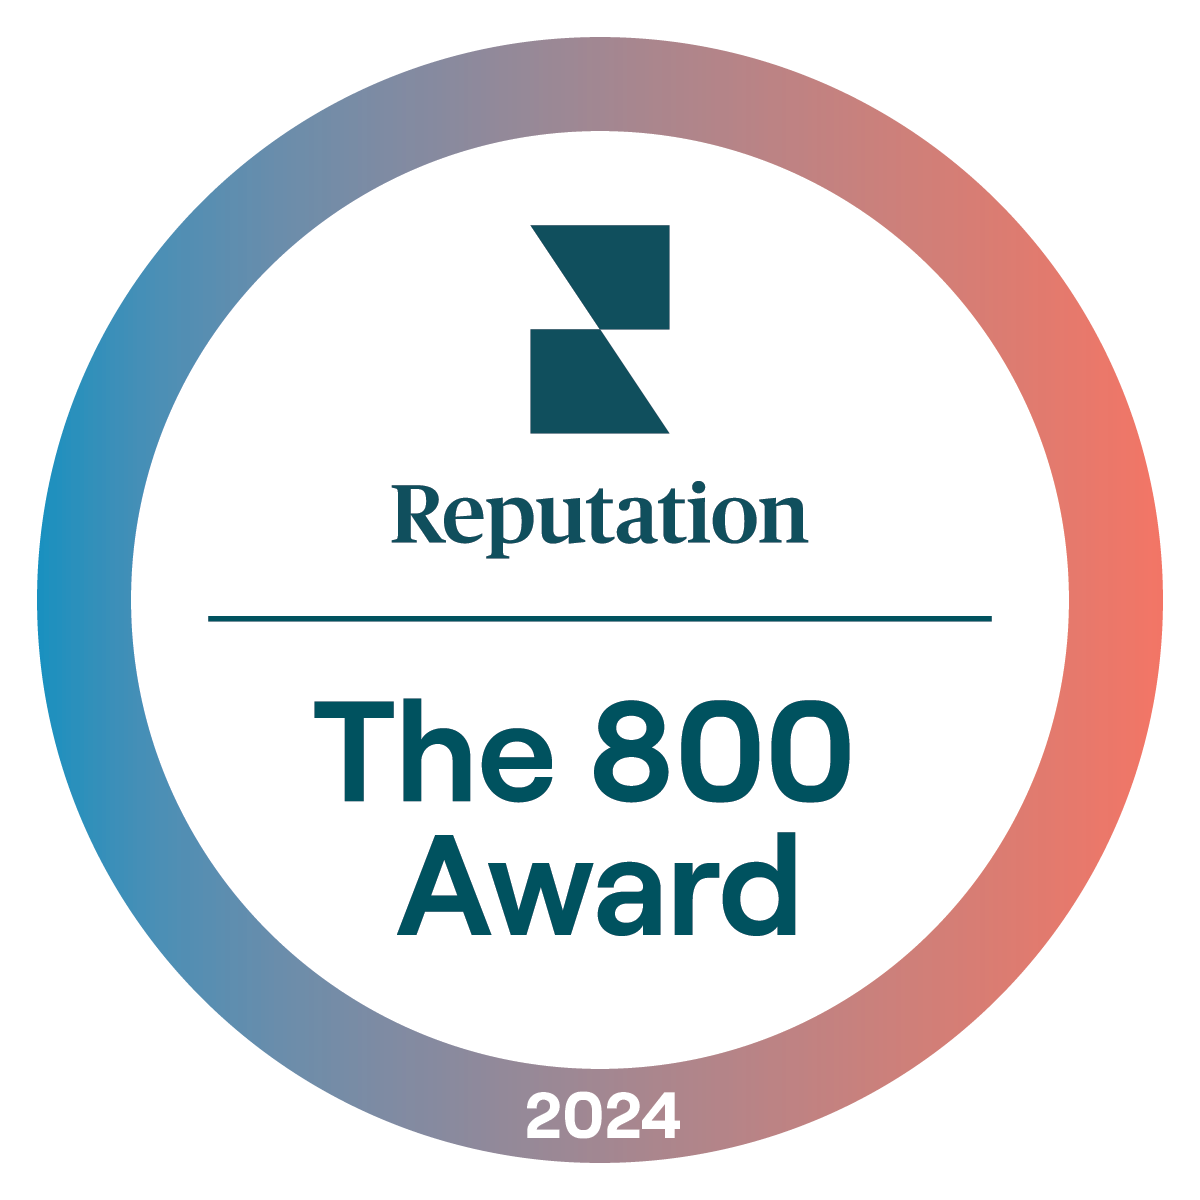 The 800 Award 2023 from Reputation